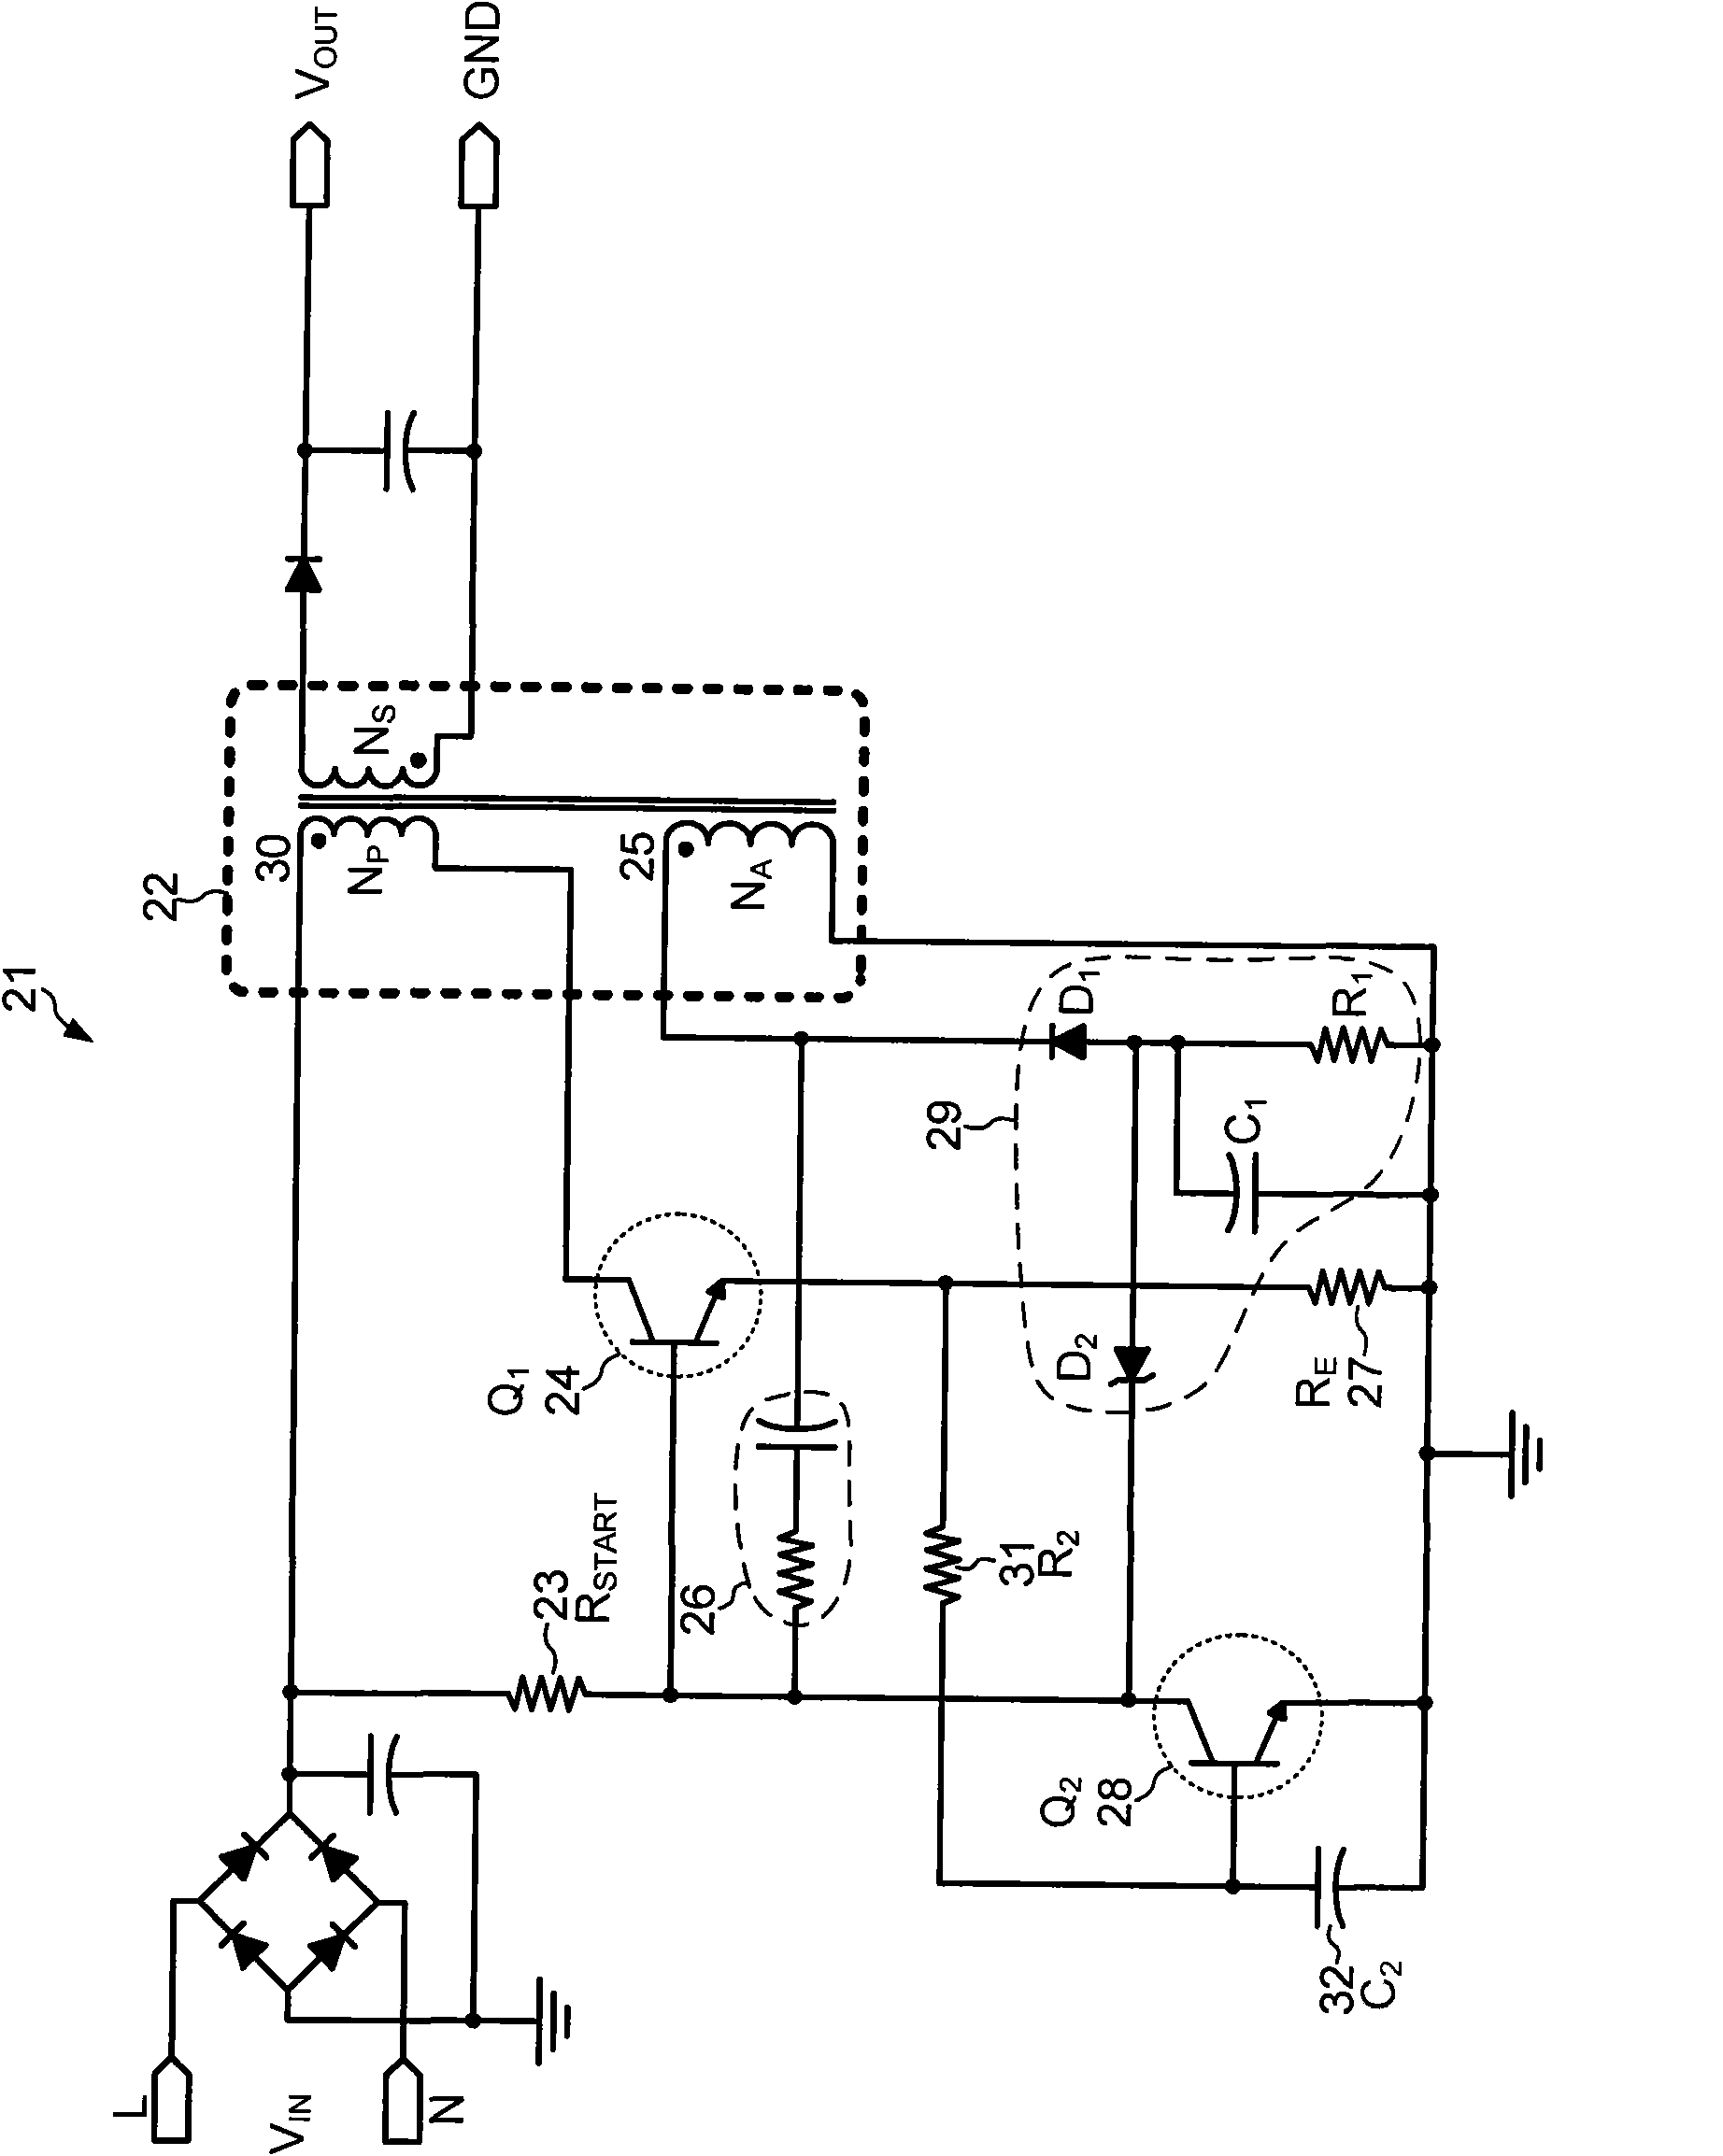 Three-pin package constant current and voltage controller in critical conduction mode